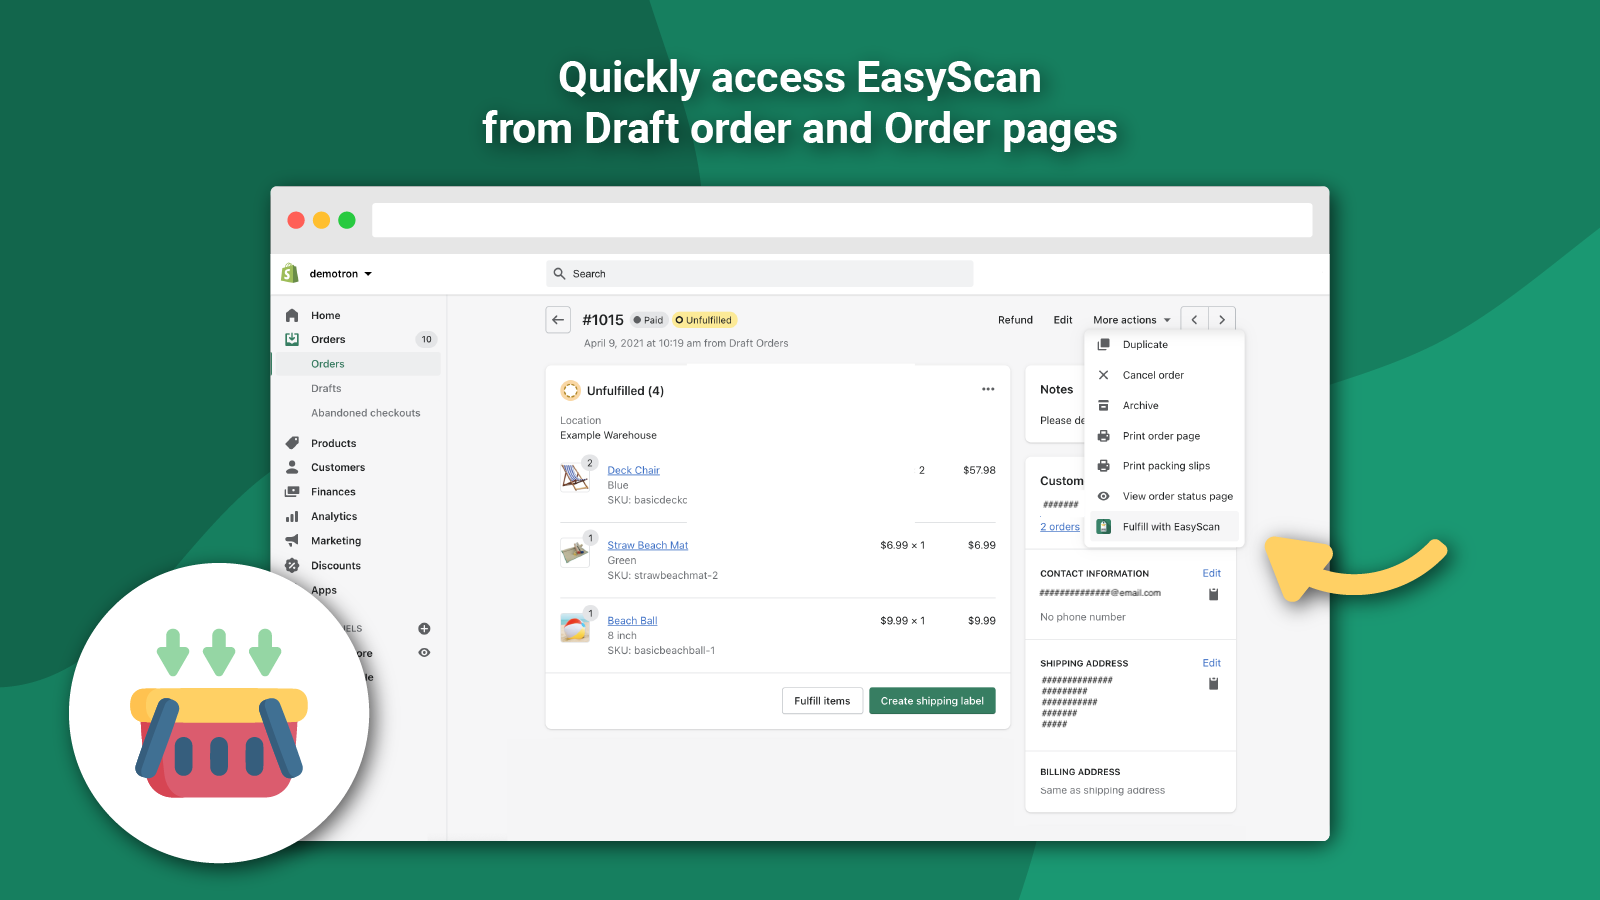 Quick access from draft order and order pages